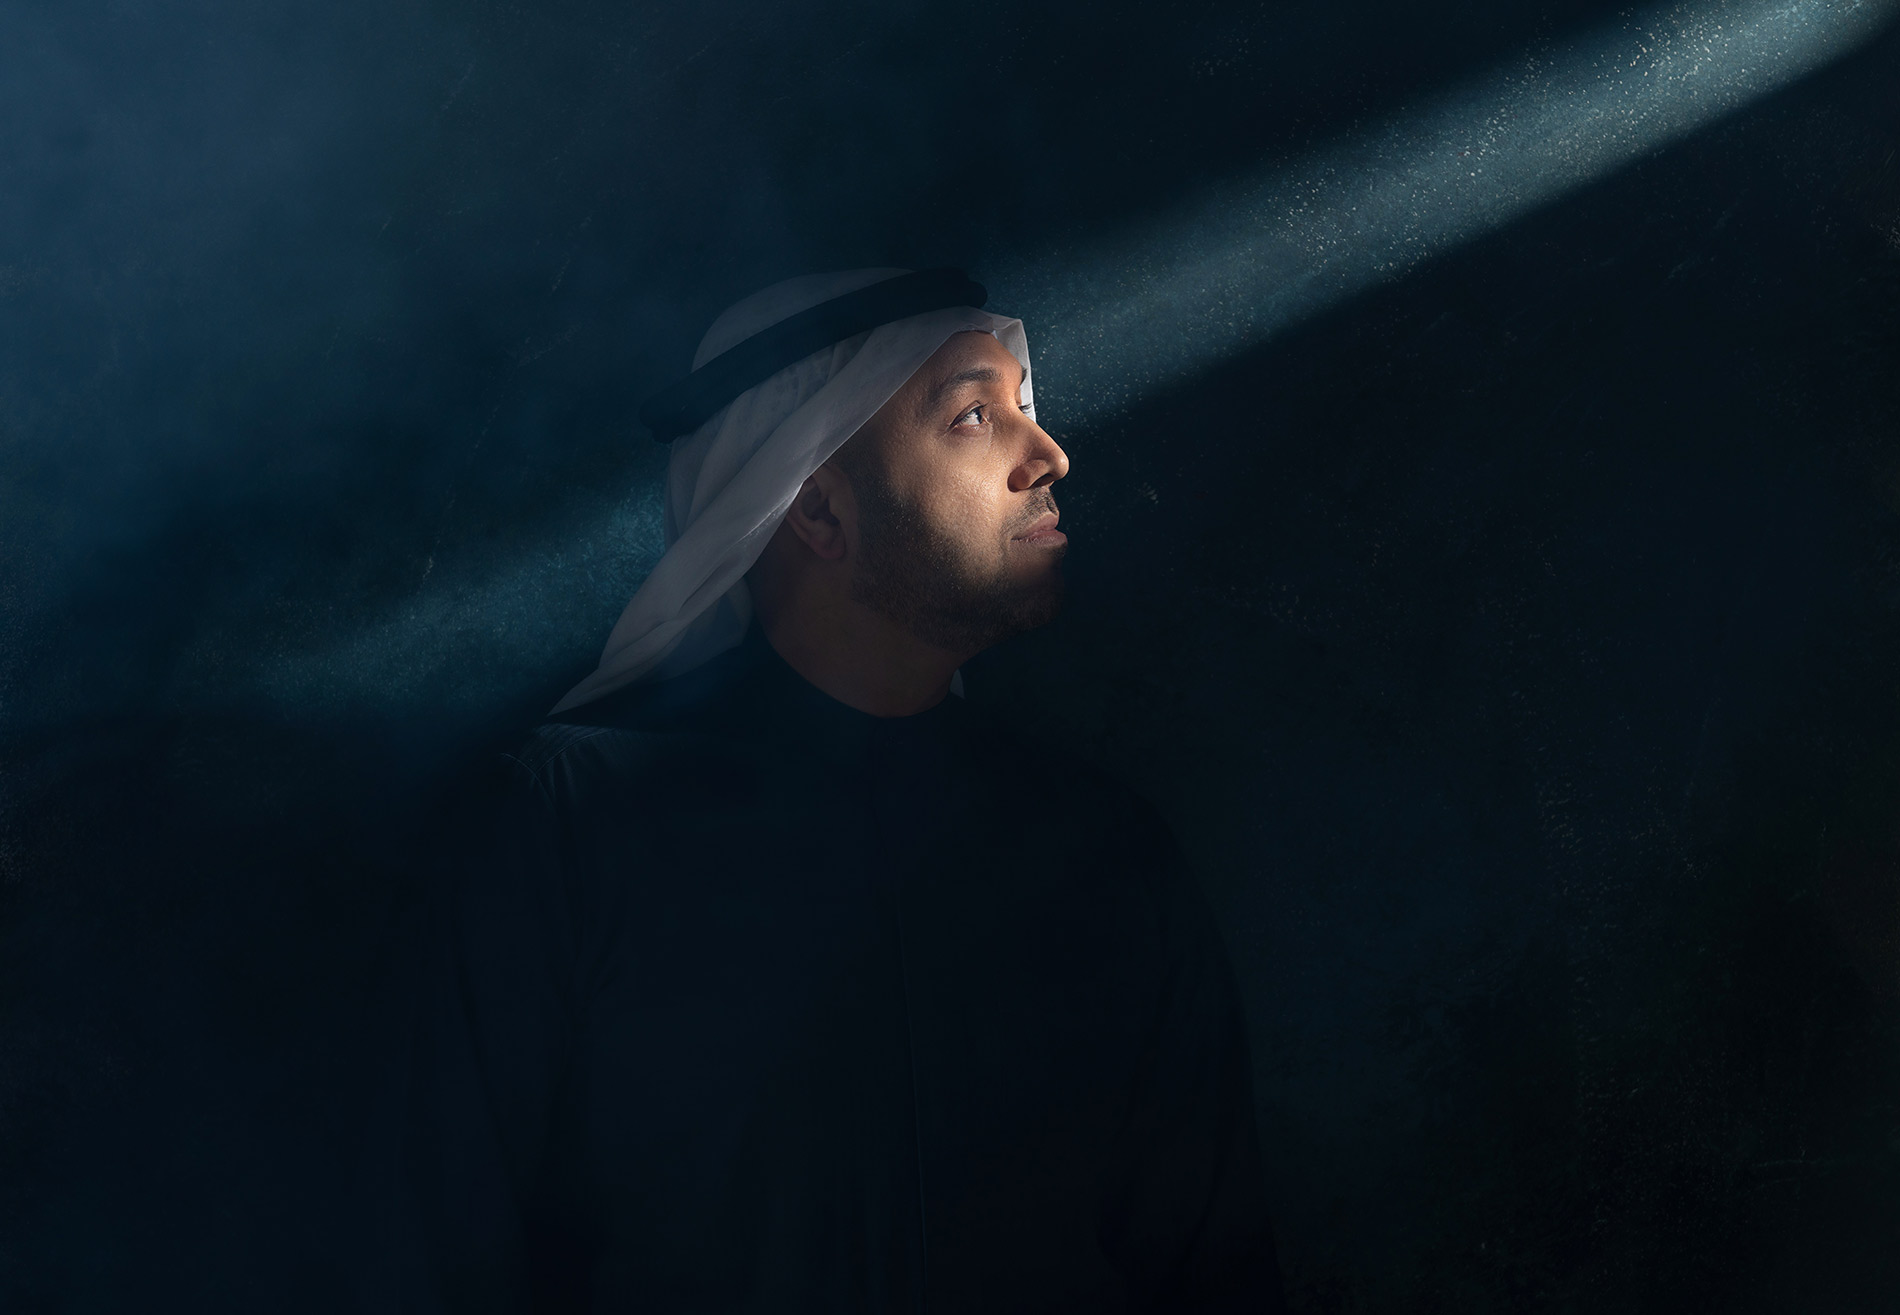 Tale of an Emirati Composer